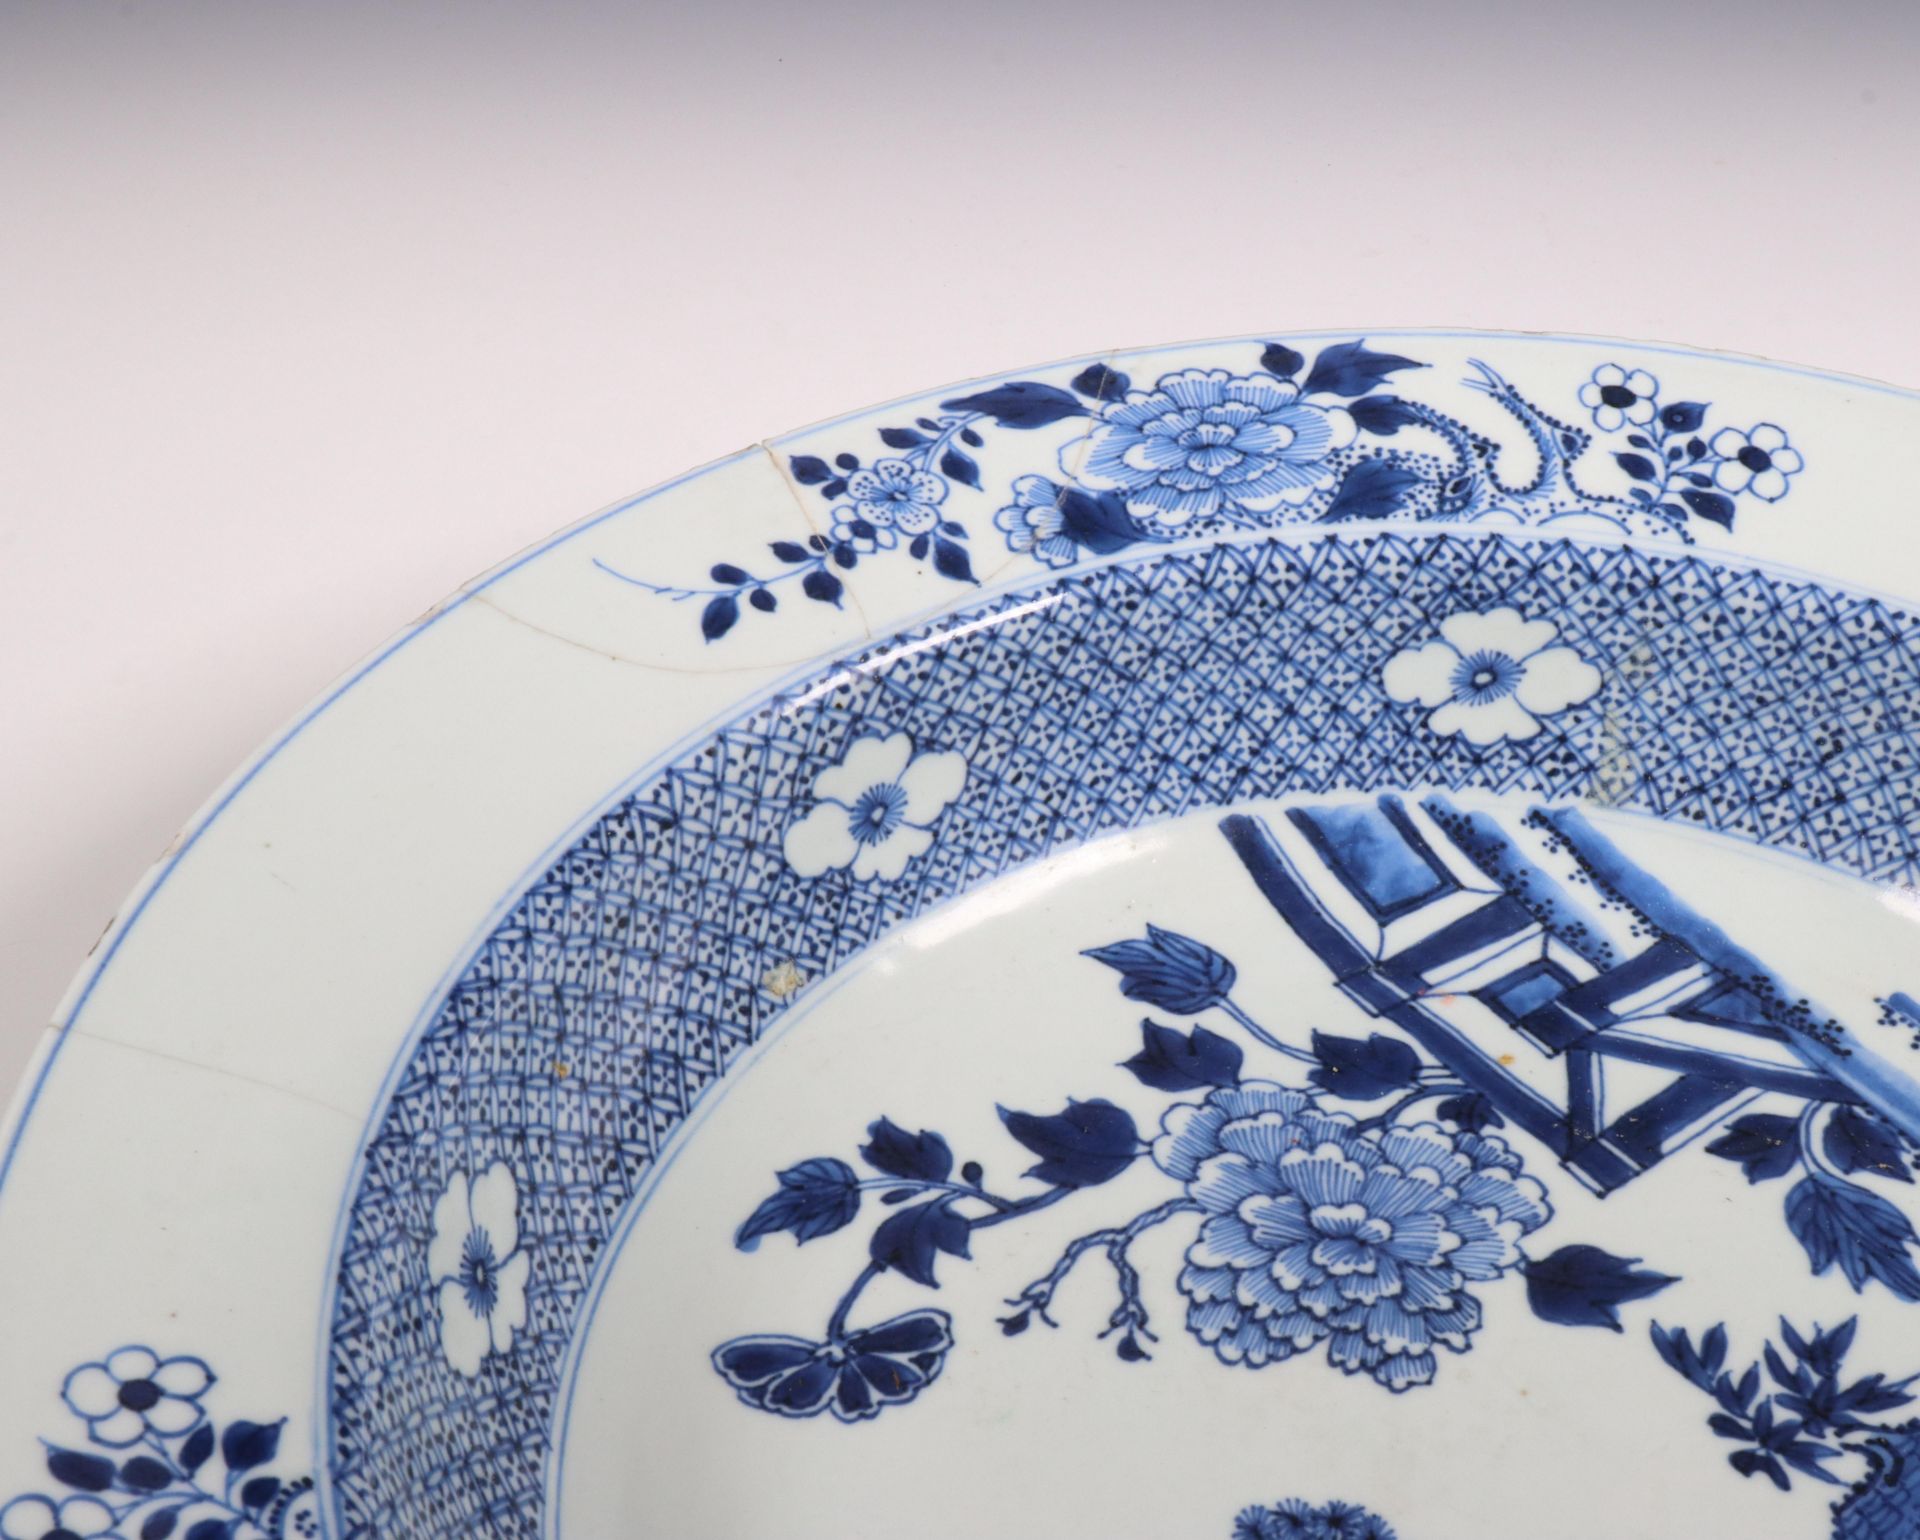 China, large blue and white porcelain serving dish, Qianlong period (1736-1795), - Image 3 of 4